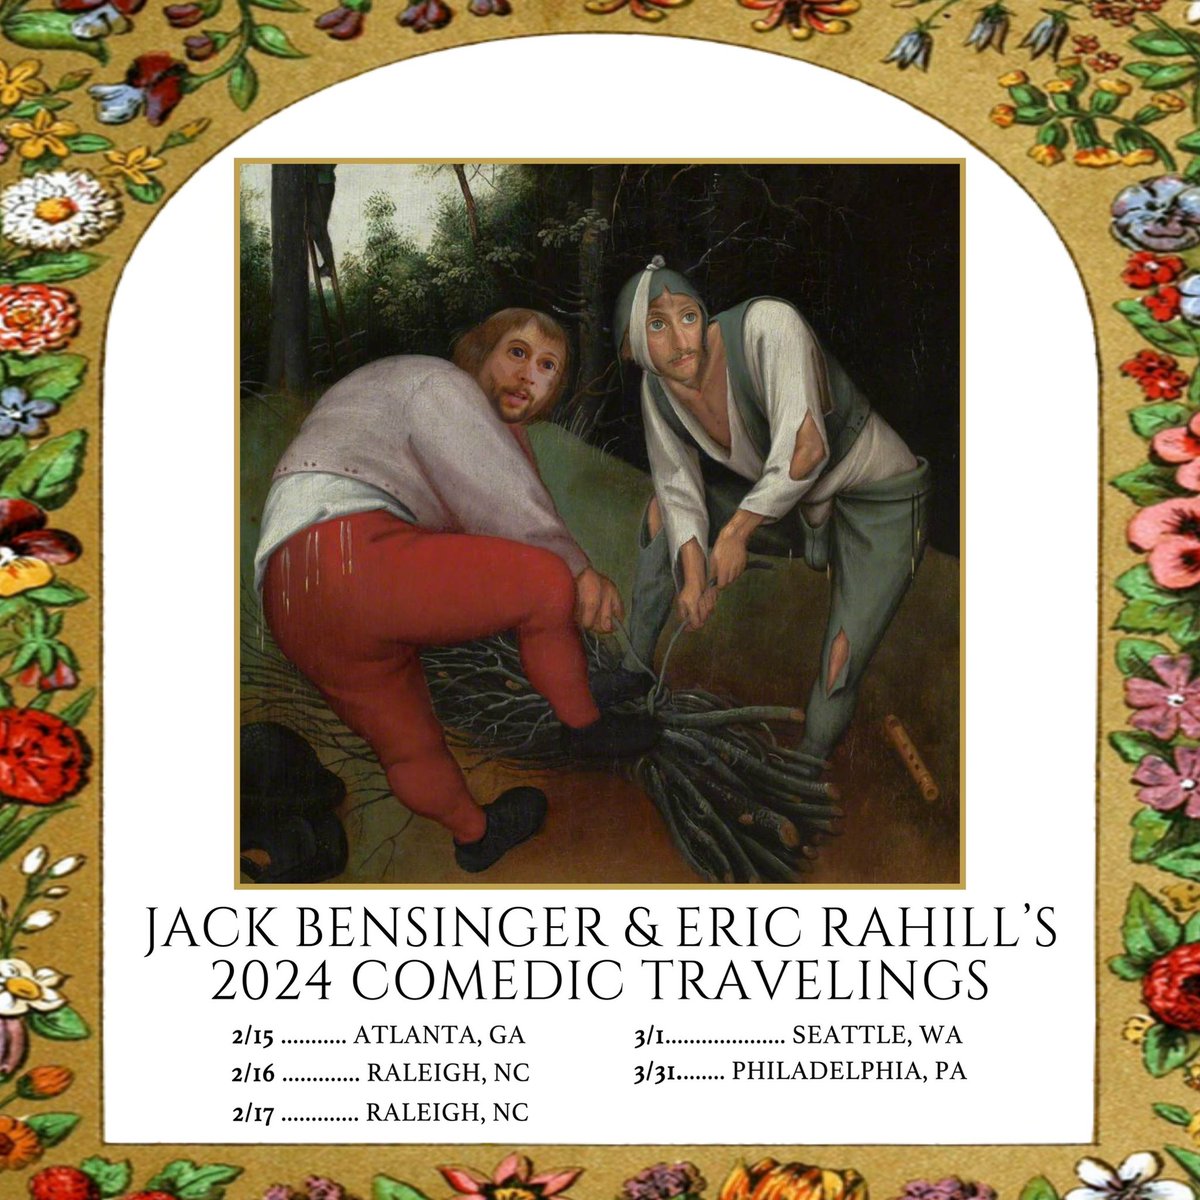 Snap… you guessed it… me and jack are doing a worldwide standup tour starting next month. Tickets here: linktr.ee/ericrahill